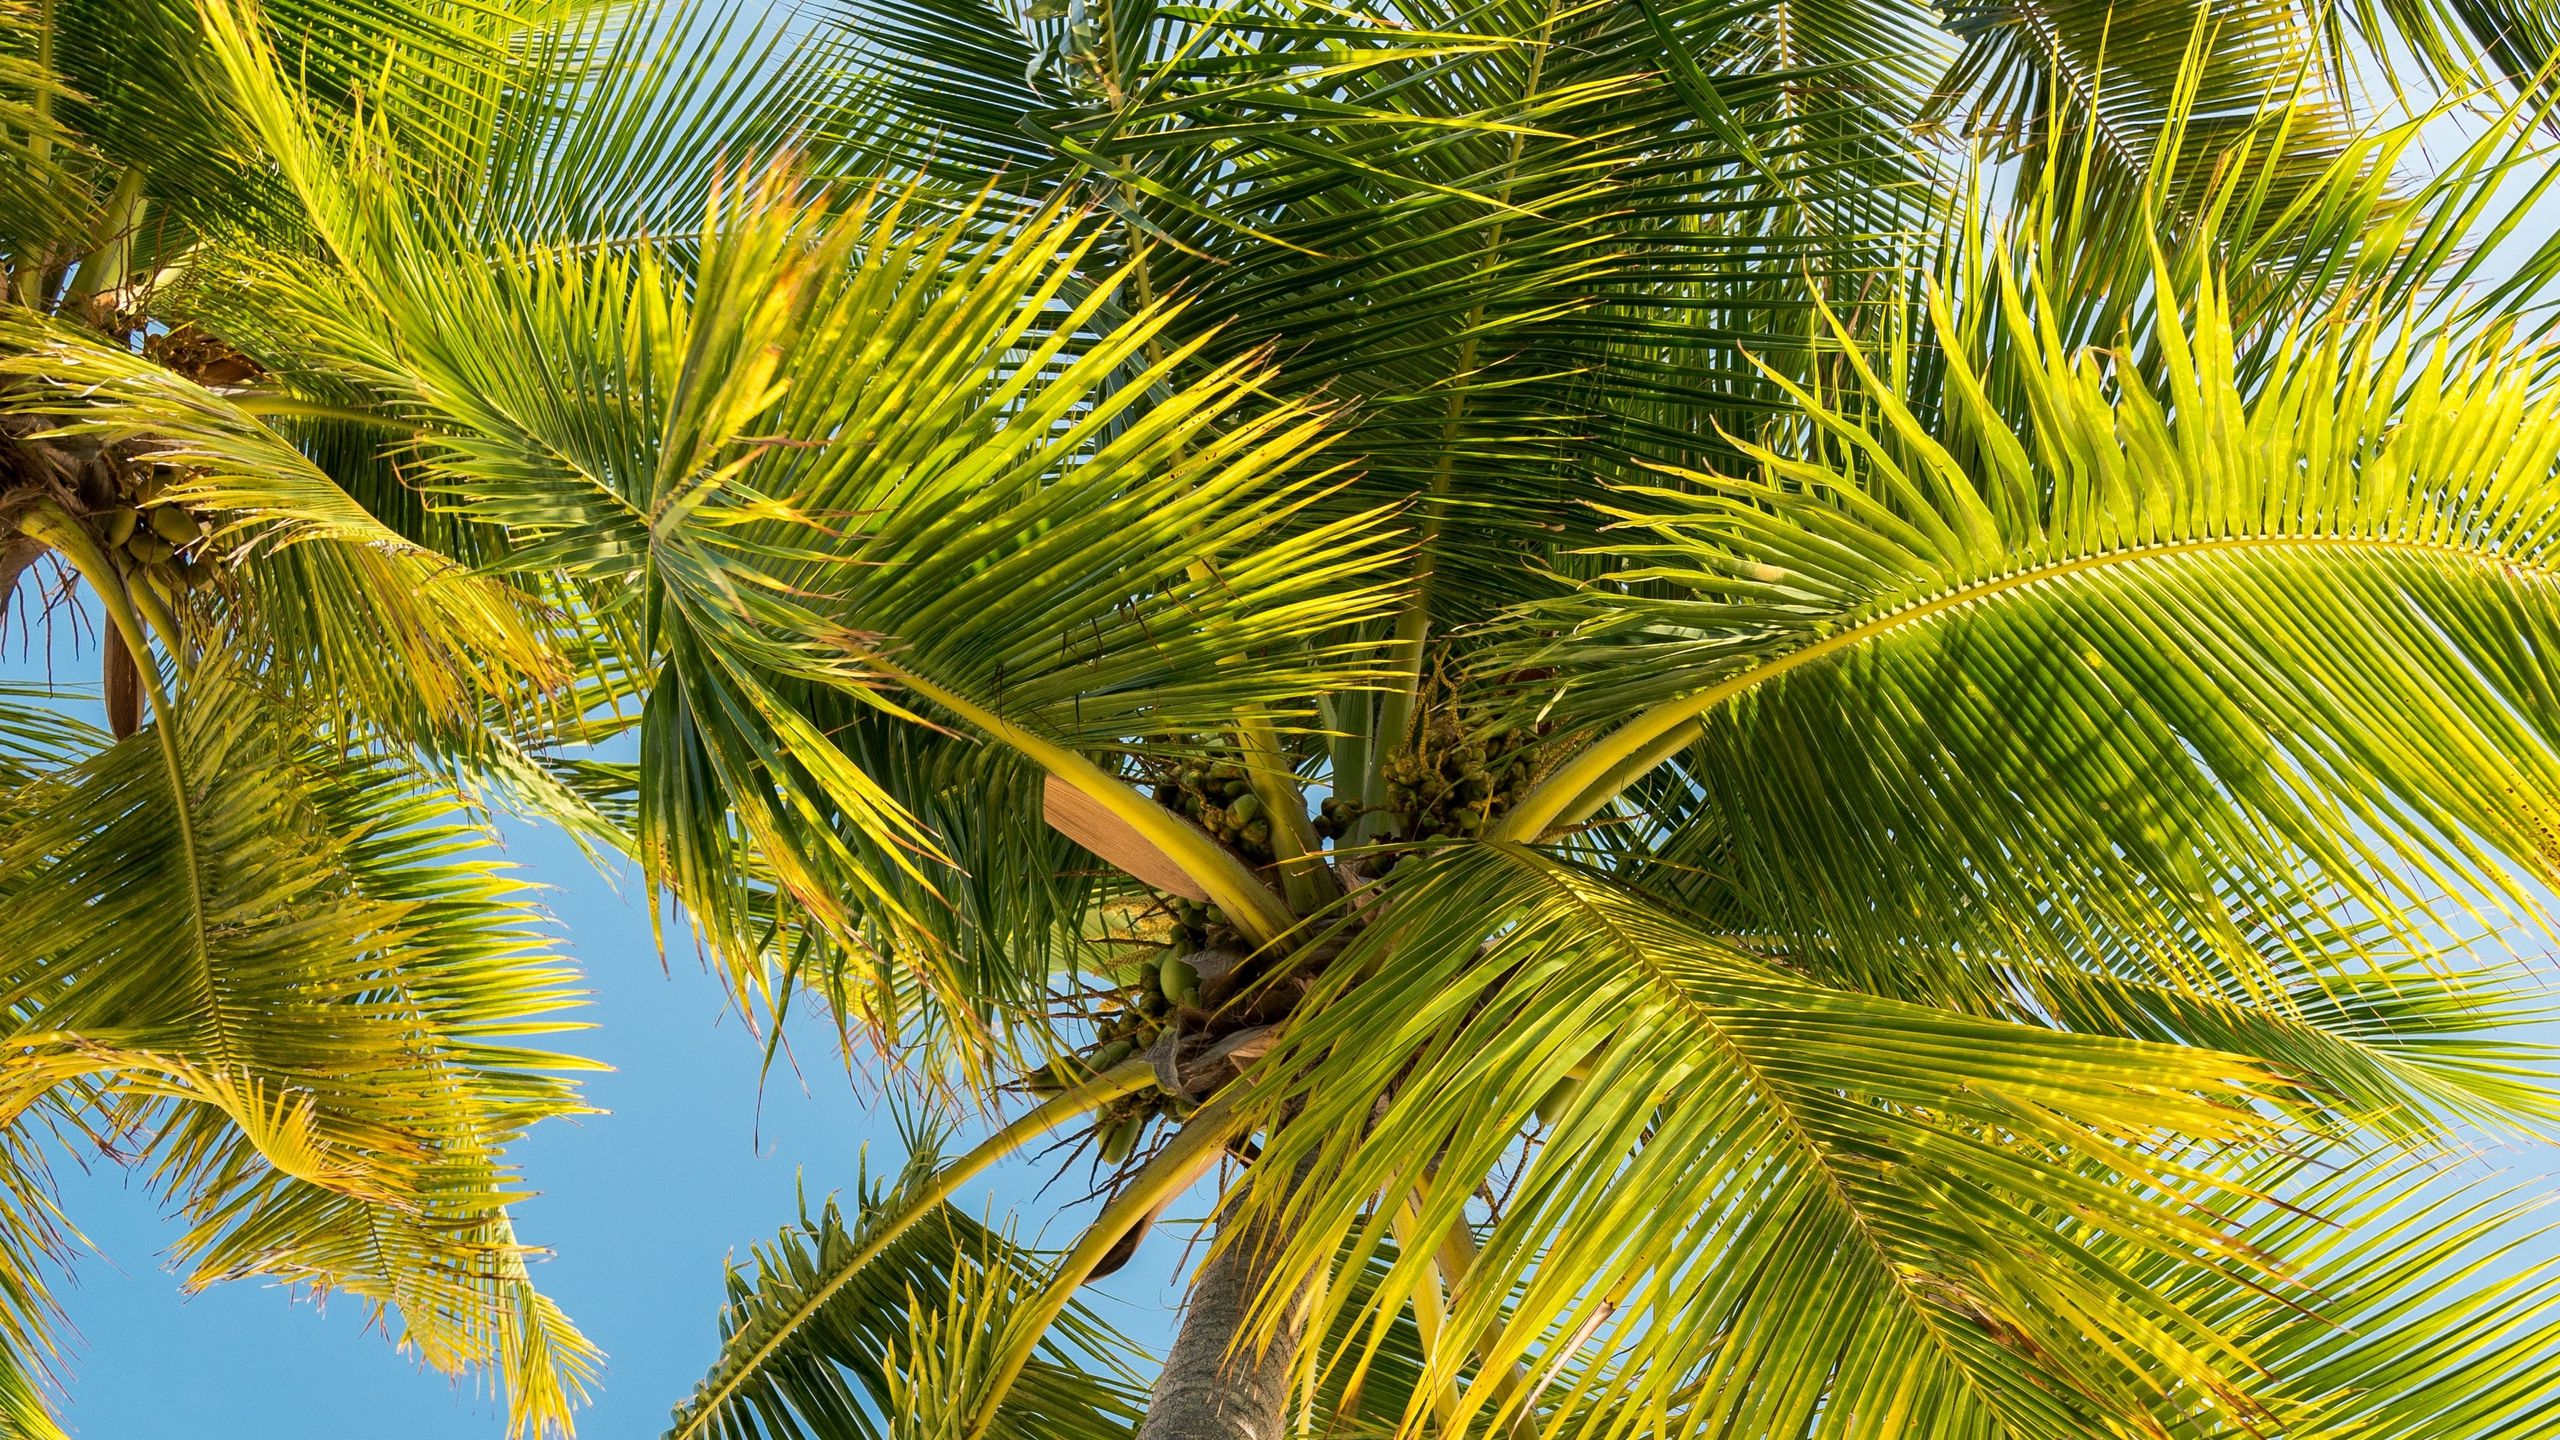 Download wallpaper 2560x1440 palm trees, trunk, branches, leaves ...